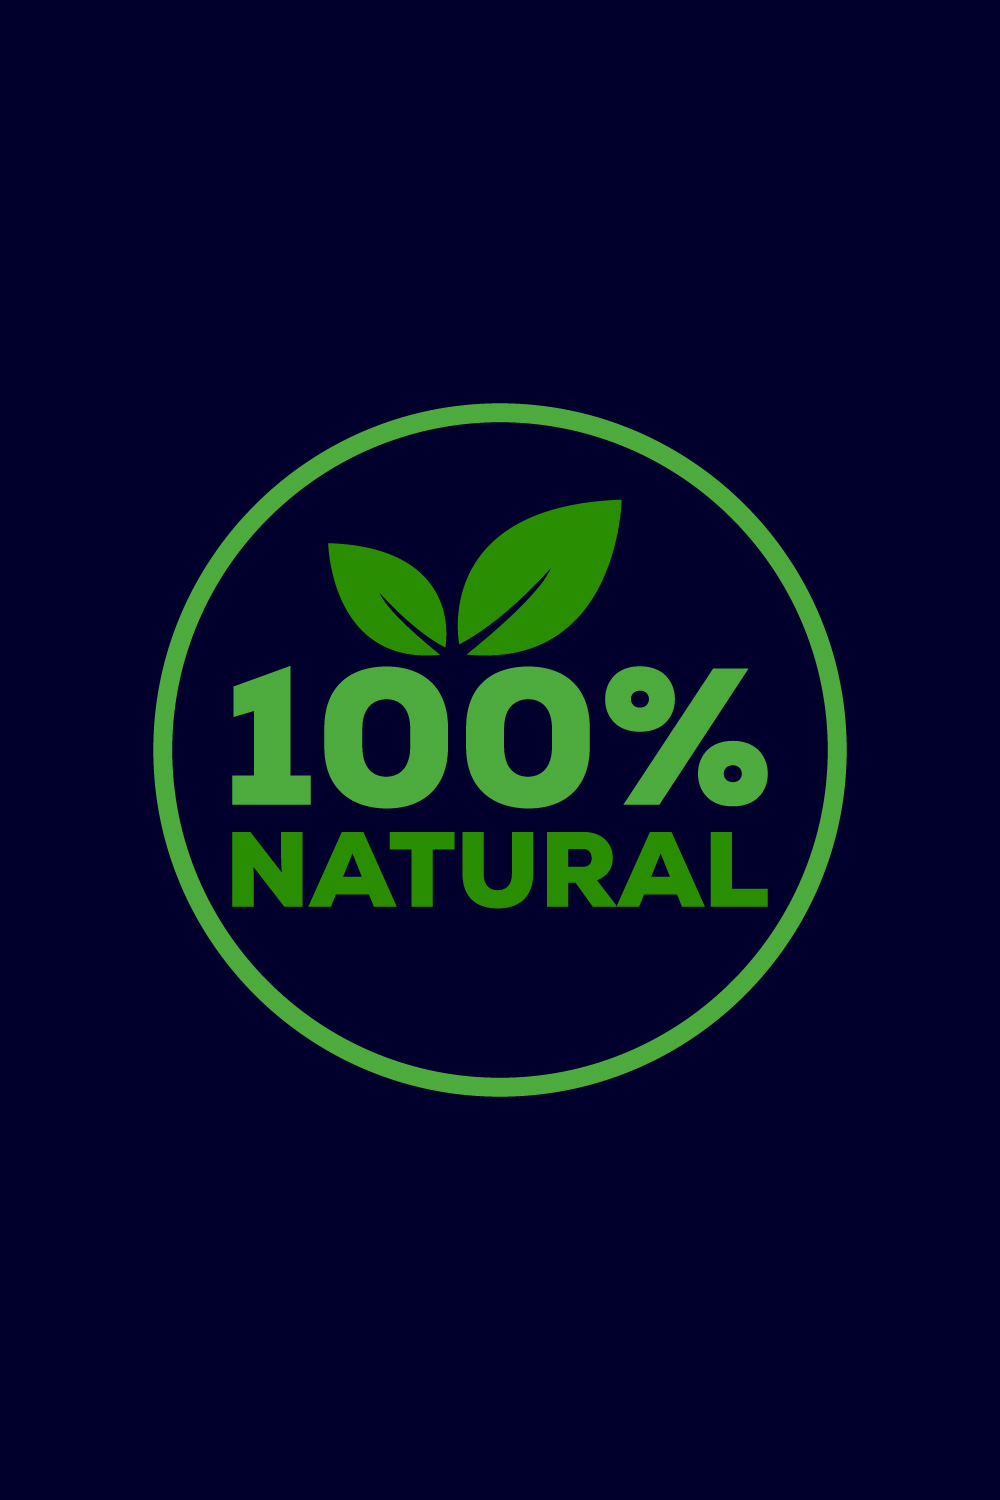 Natural, organic, fresh food vector logo or badge template for product pinterest preview image.